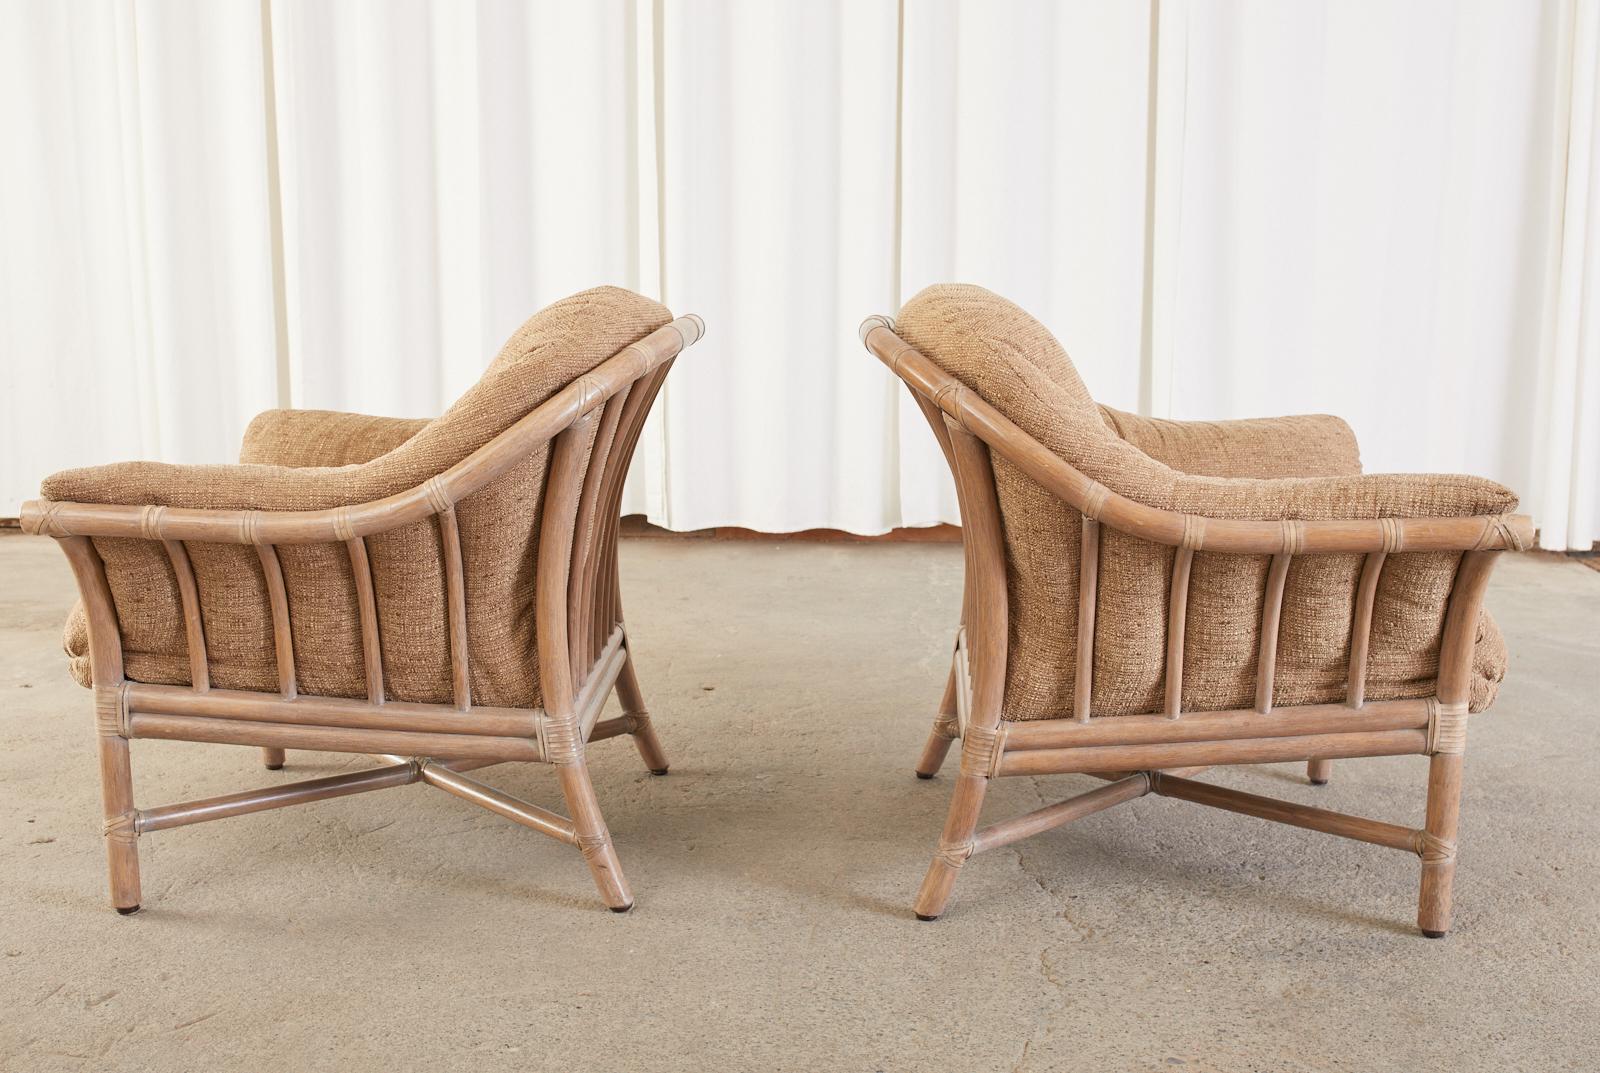 Hand-Crafted Pair of McGuire Oversized Cerused Rattan Lounge Chairs & Ottoman